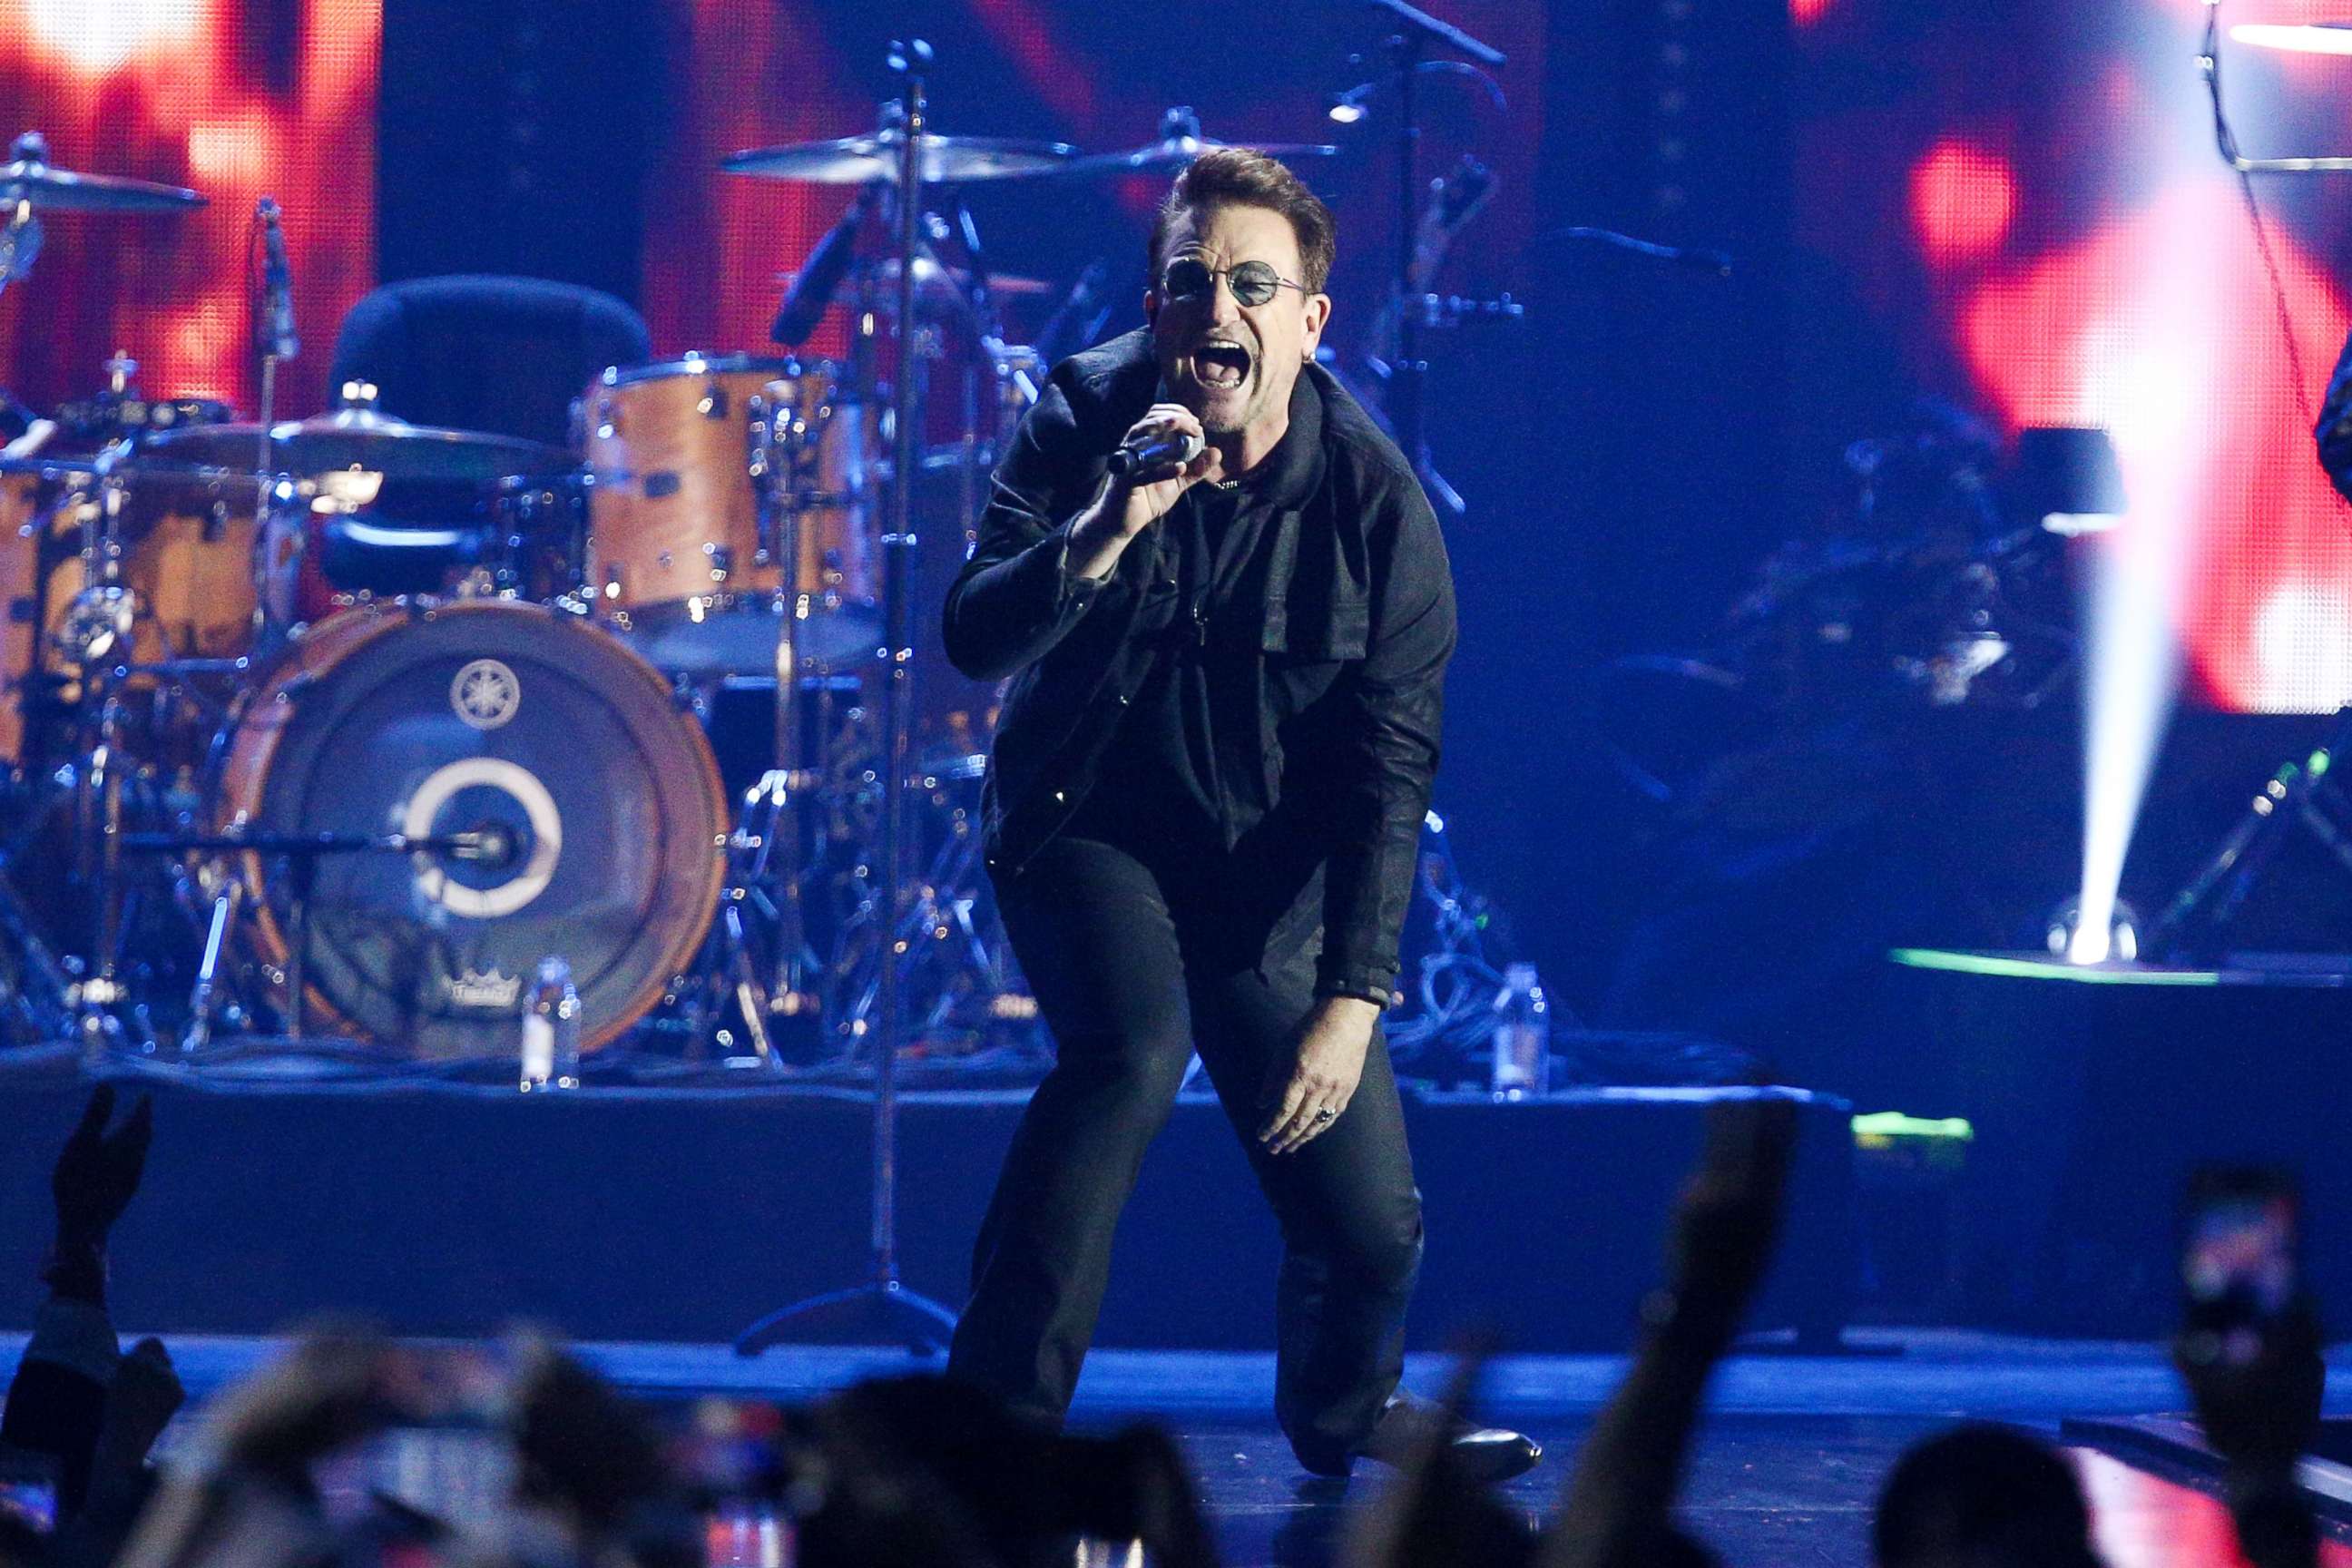 PHOTO: Bono of the music group U2 performs at the 2016 iHeartRadio Music Festival, Sept. 23, 2016, in Las Vegas.